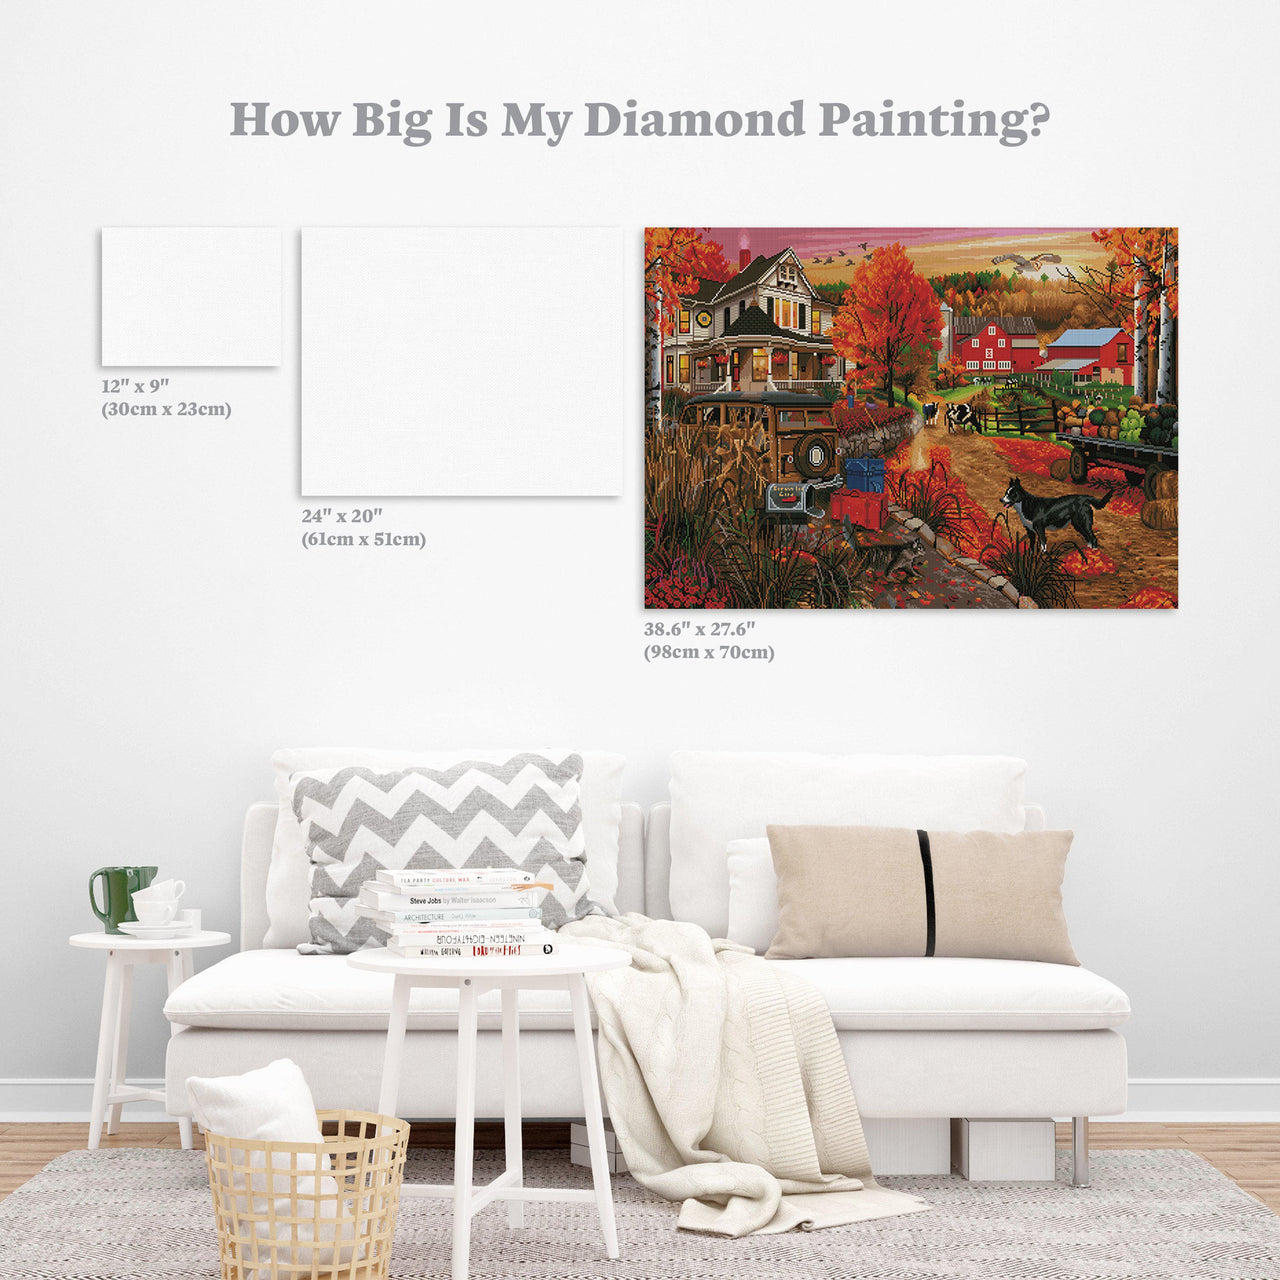 Diamond Painting Country Inn & Farm 38.6" x 27.6″ (98cm x 70cm) / Square with 54 Colors including 2 ABs